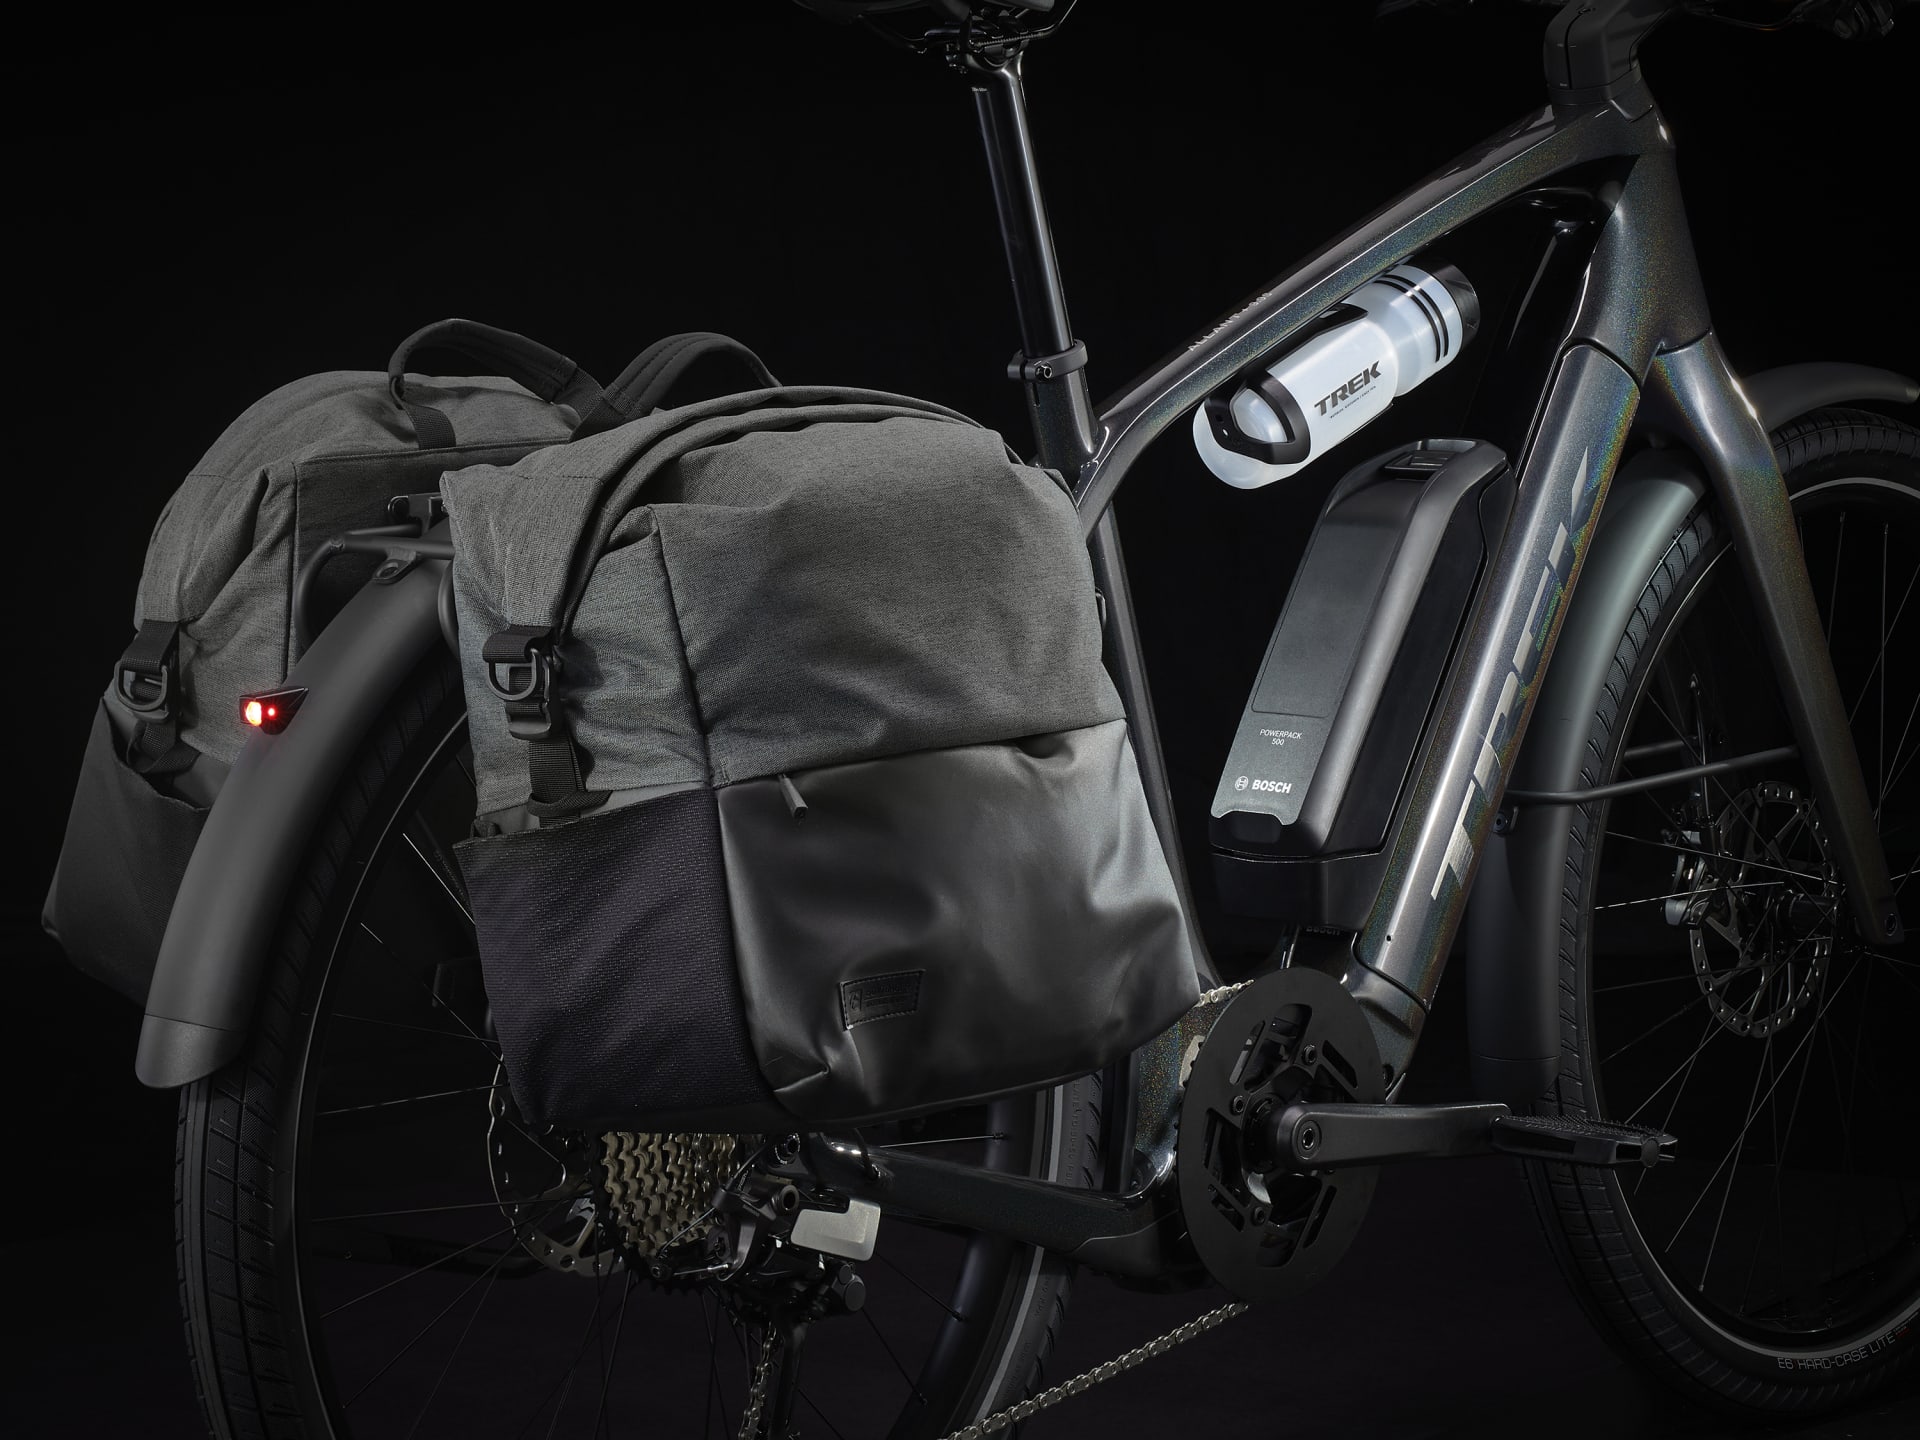 Trek Allant+ with panniers mounted on its rear rack and a water bottle under the top tube